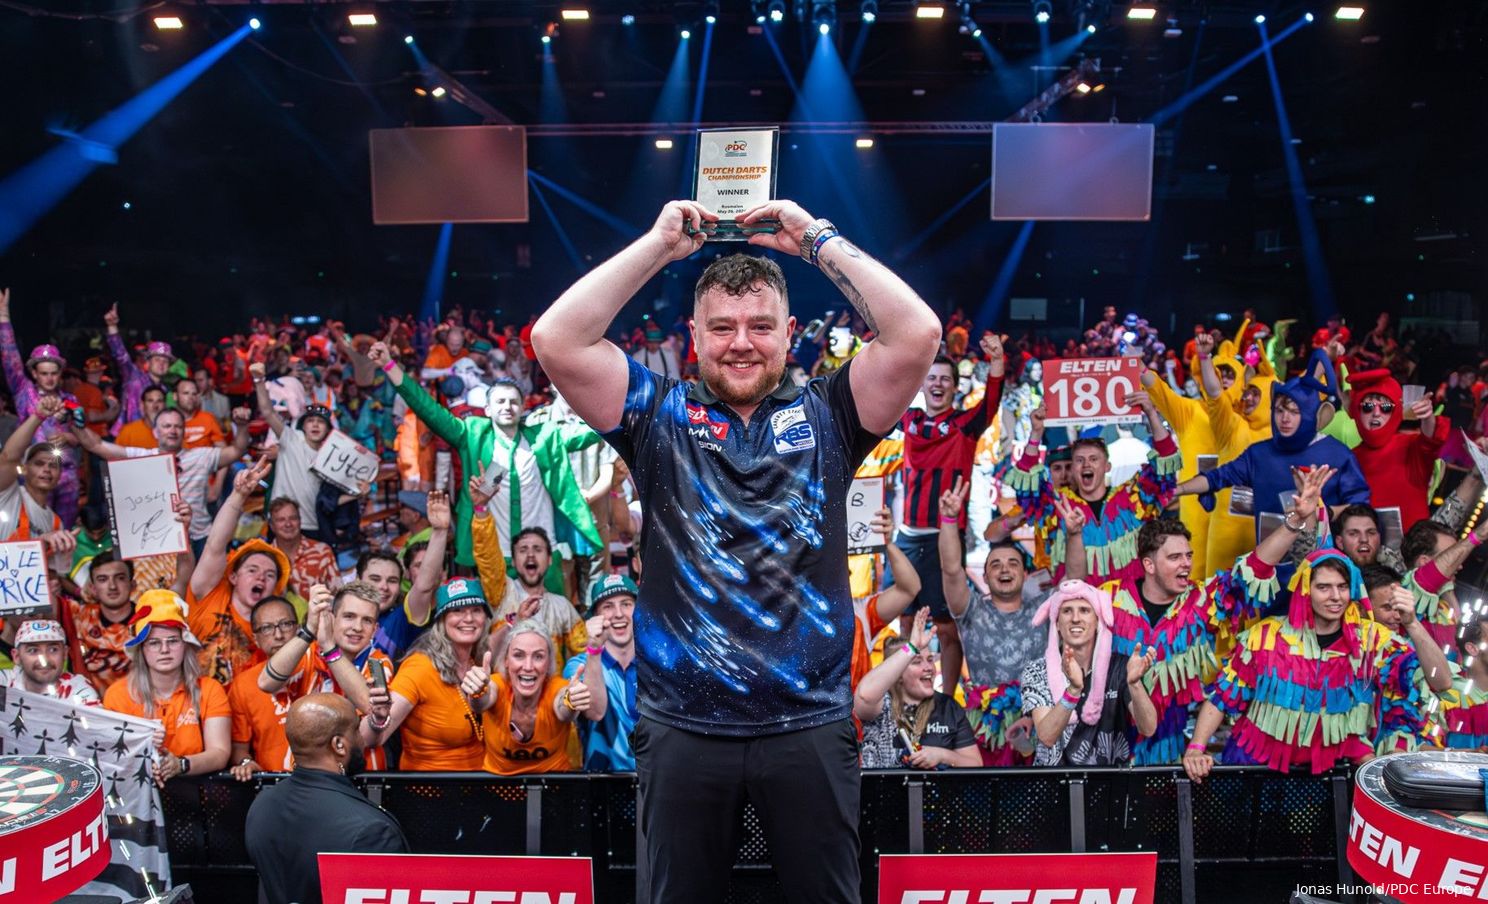 "I have proved that I can win on the big stage now” - Josh Rock already eyeing major glory after Dutch Darts Championship success